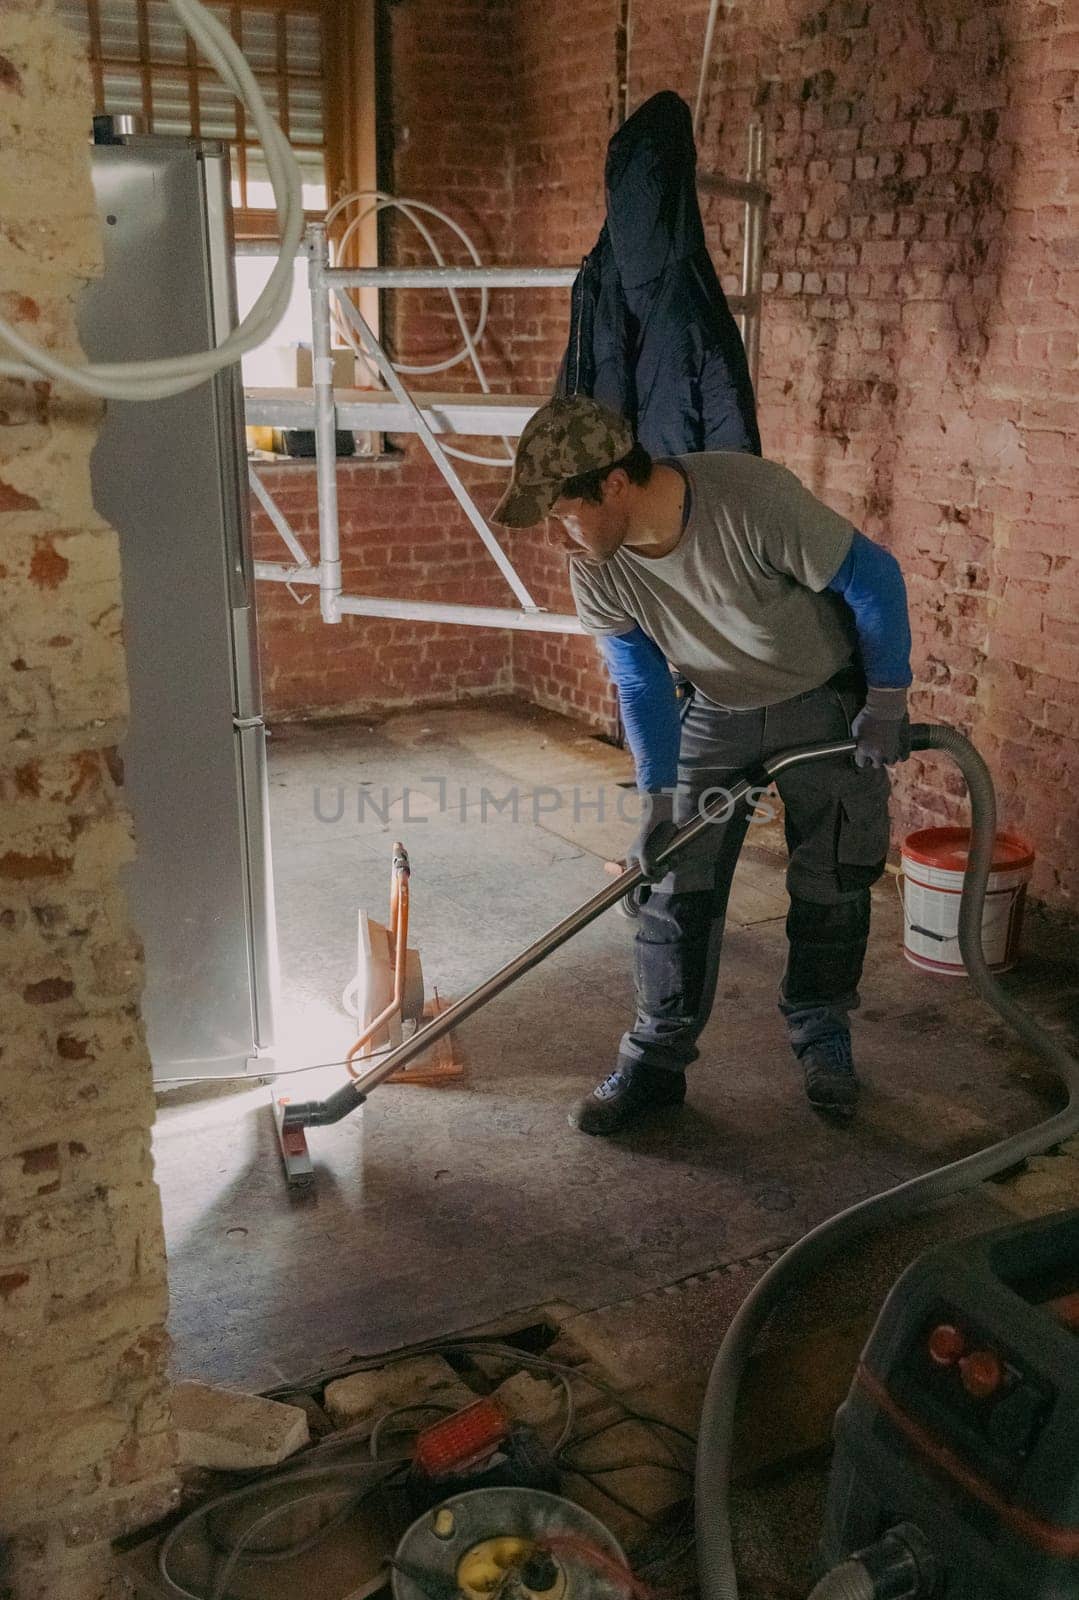 One young Caucasian man in a gray casual work uniform vacuums up construction debris after laying bricks in a room where renovations are underway, standing sideways under the light of a lantern in an old ruined house, close-up side view.